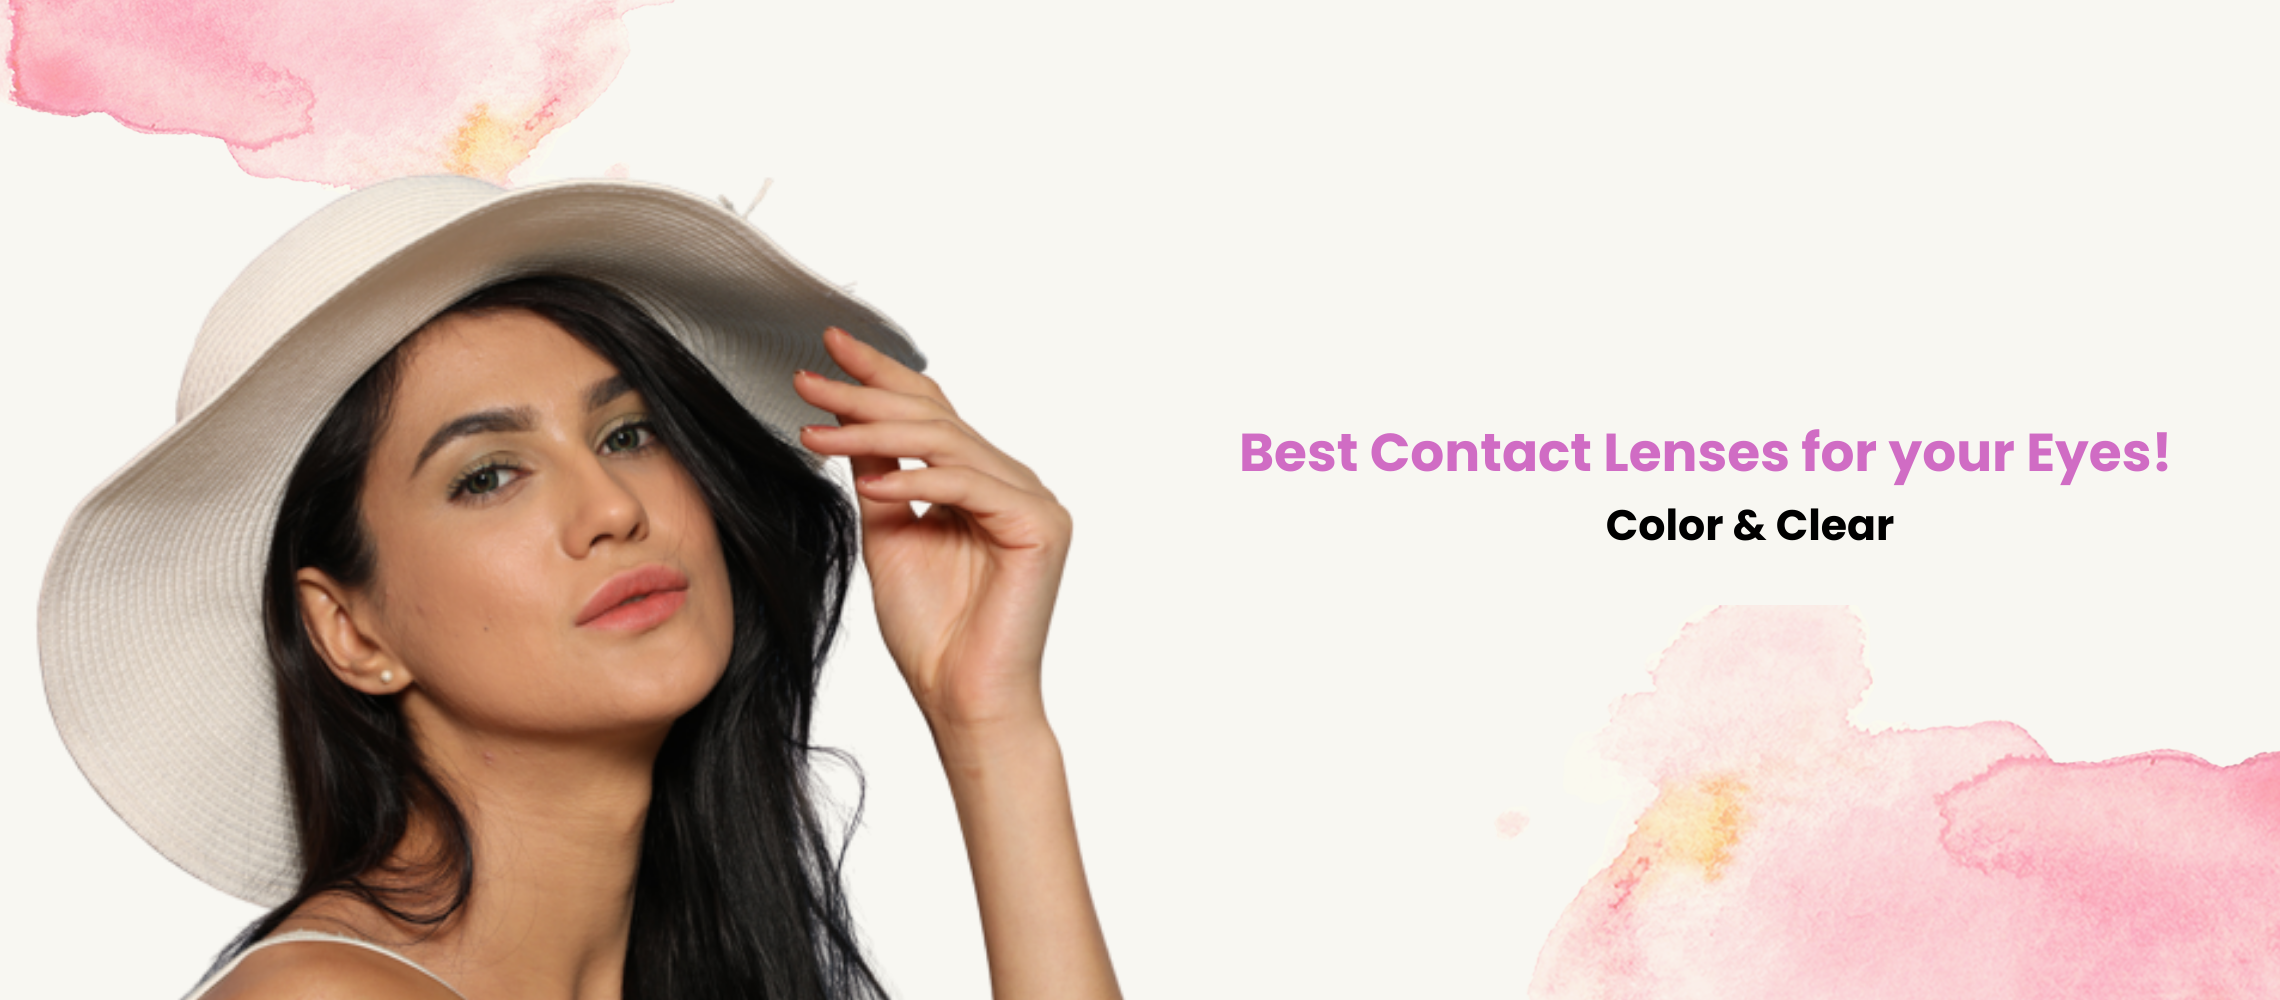 Embrace the best contact lenses with Aqualens